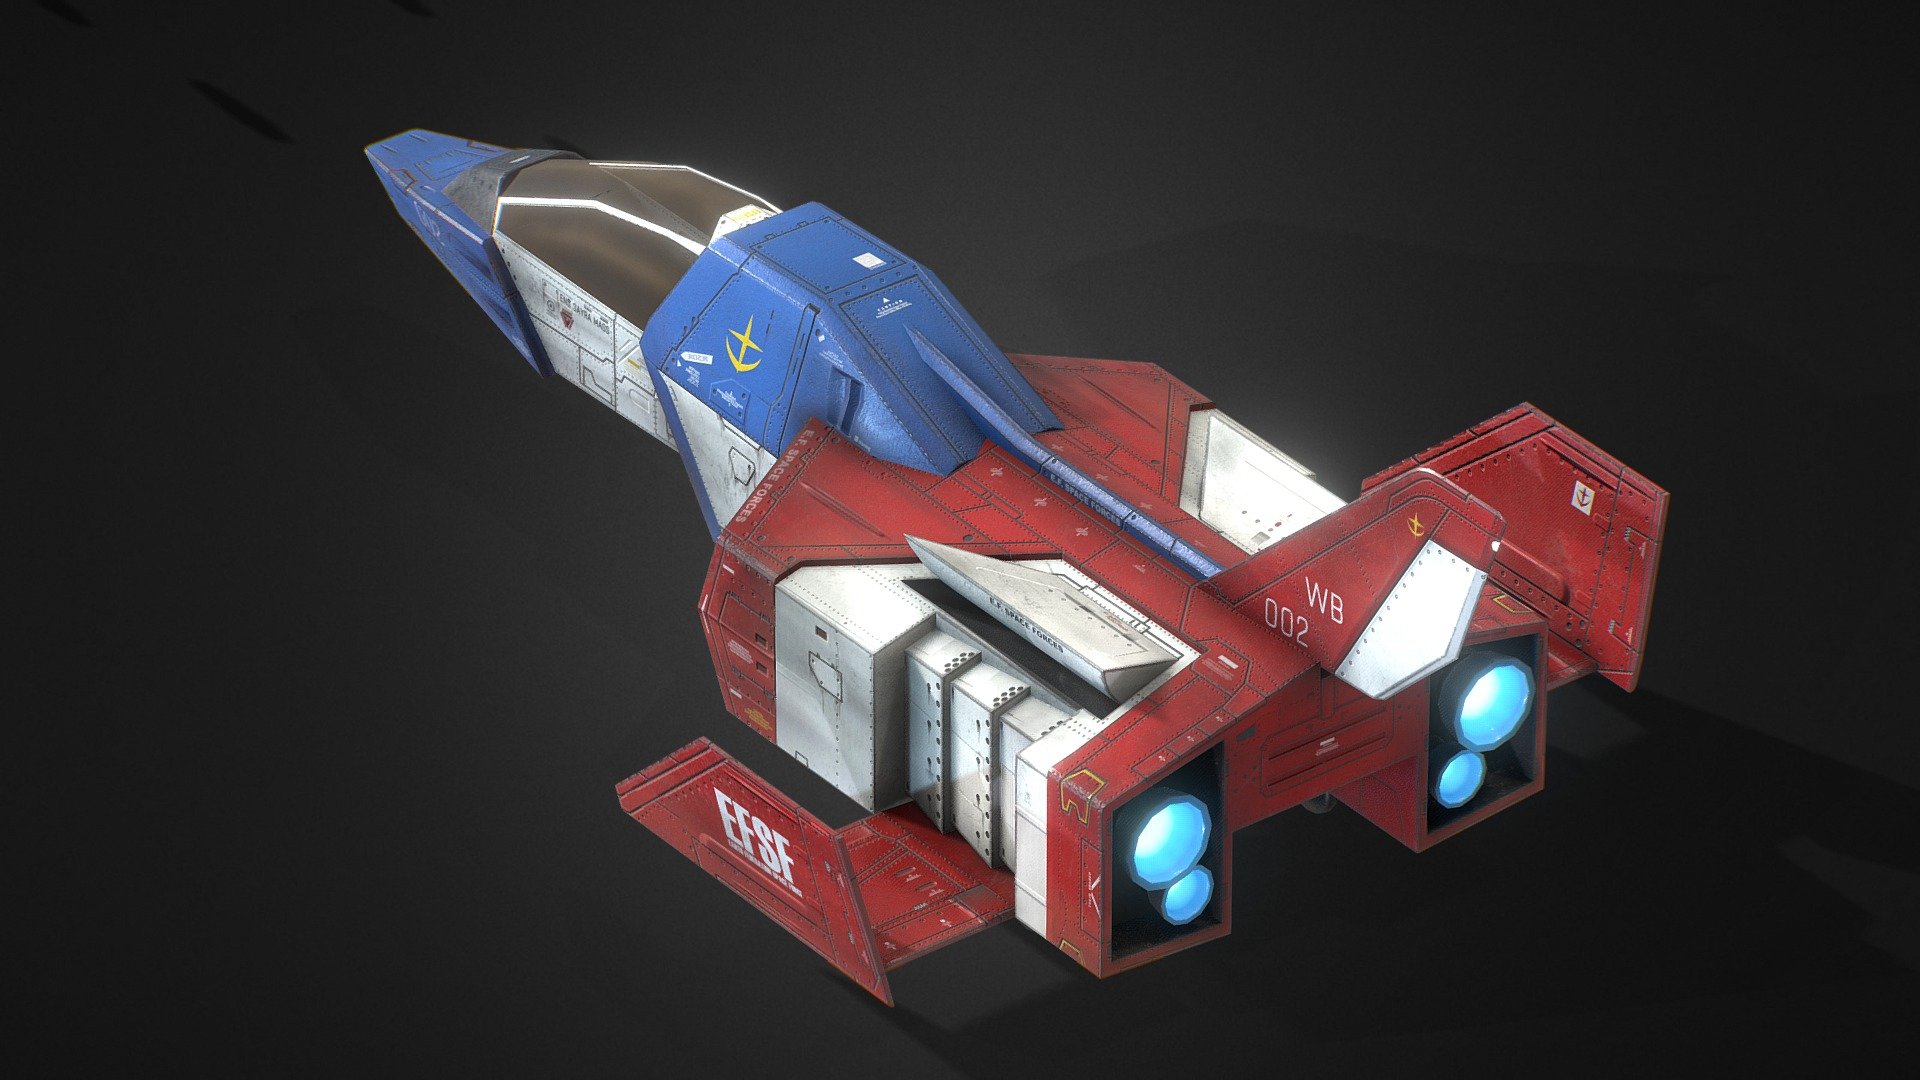 FF-X7 Core Fighter
This model was made for One Year War mod of Hearts of Iron IV. 
Our Mod Steam Home Page https://steamcommunity.com/sharedfiles/filedetails/?id=2064985570 - FF-X7 Core Fighter - 3D model by One Year War Mod (@hoi4oneyearwar) 3d model